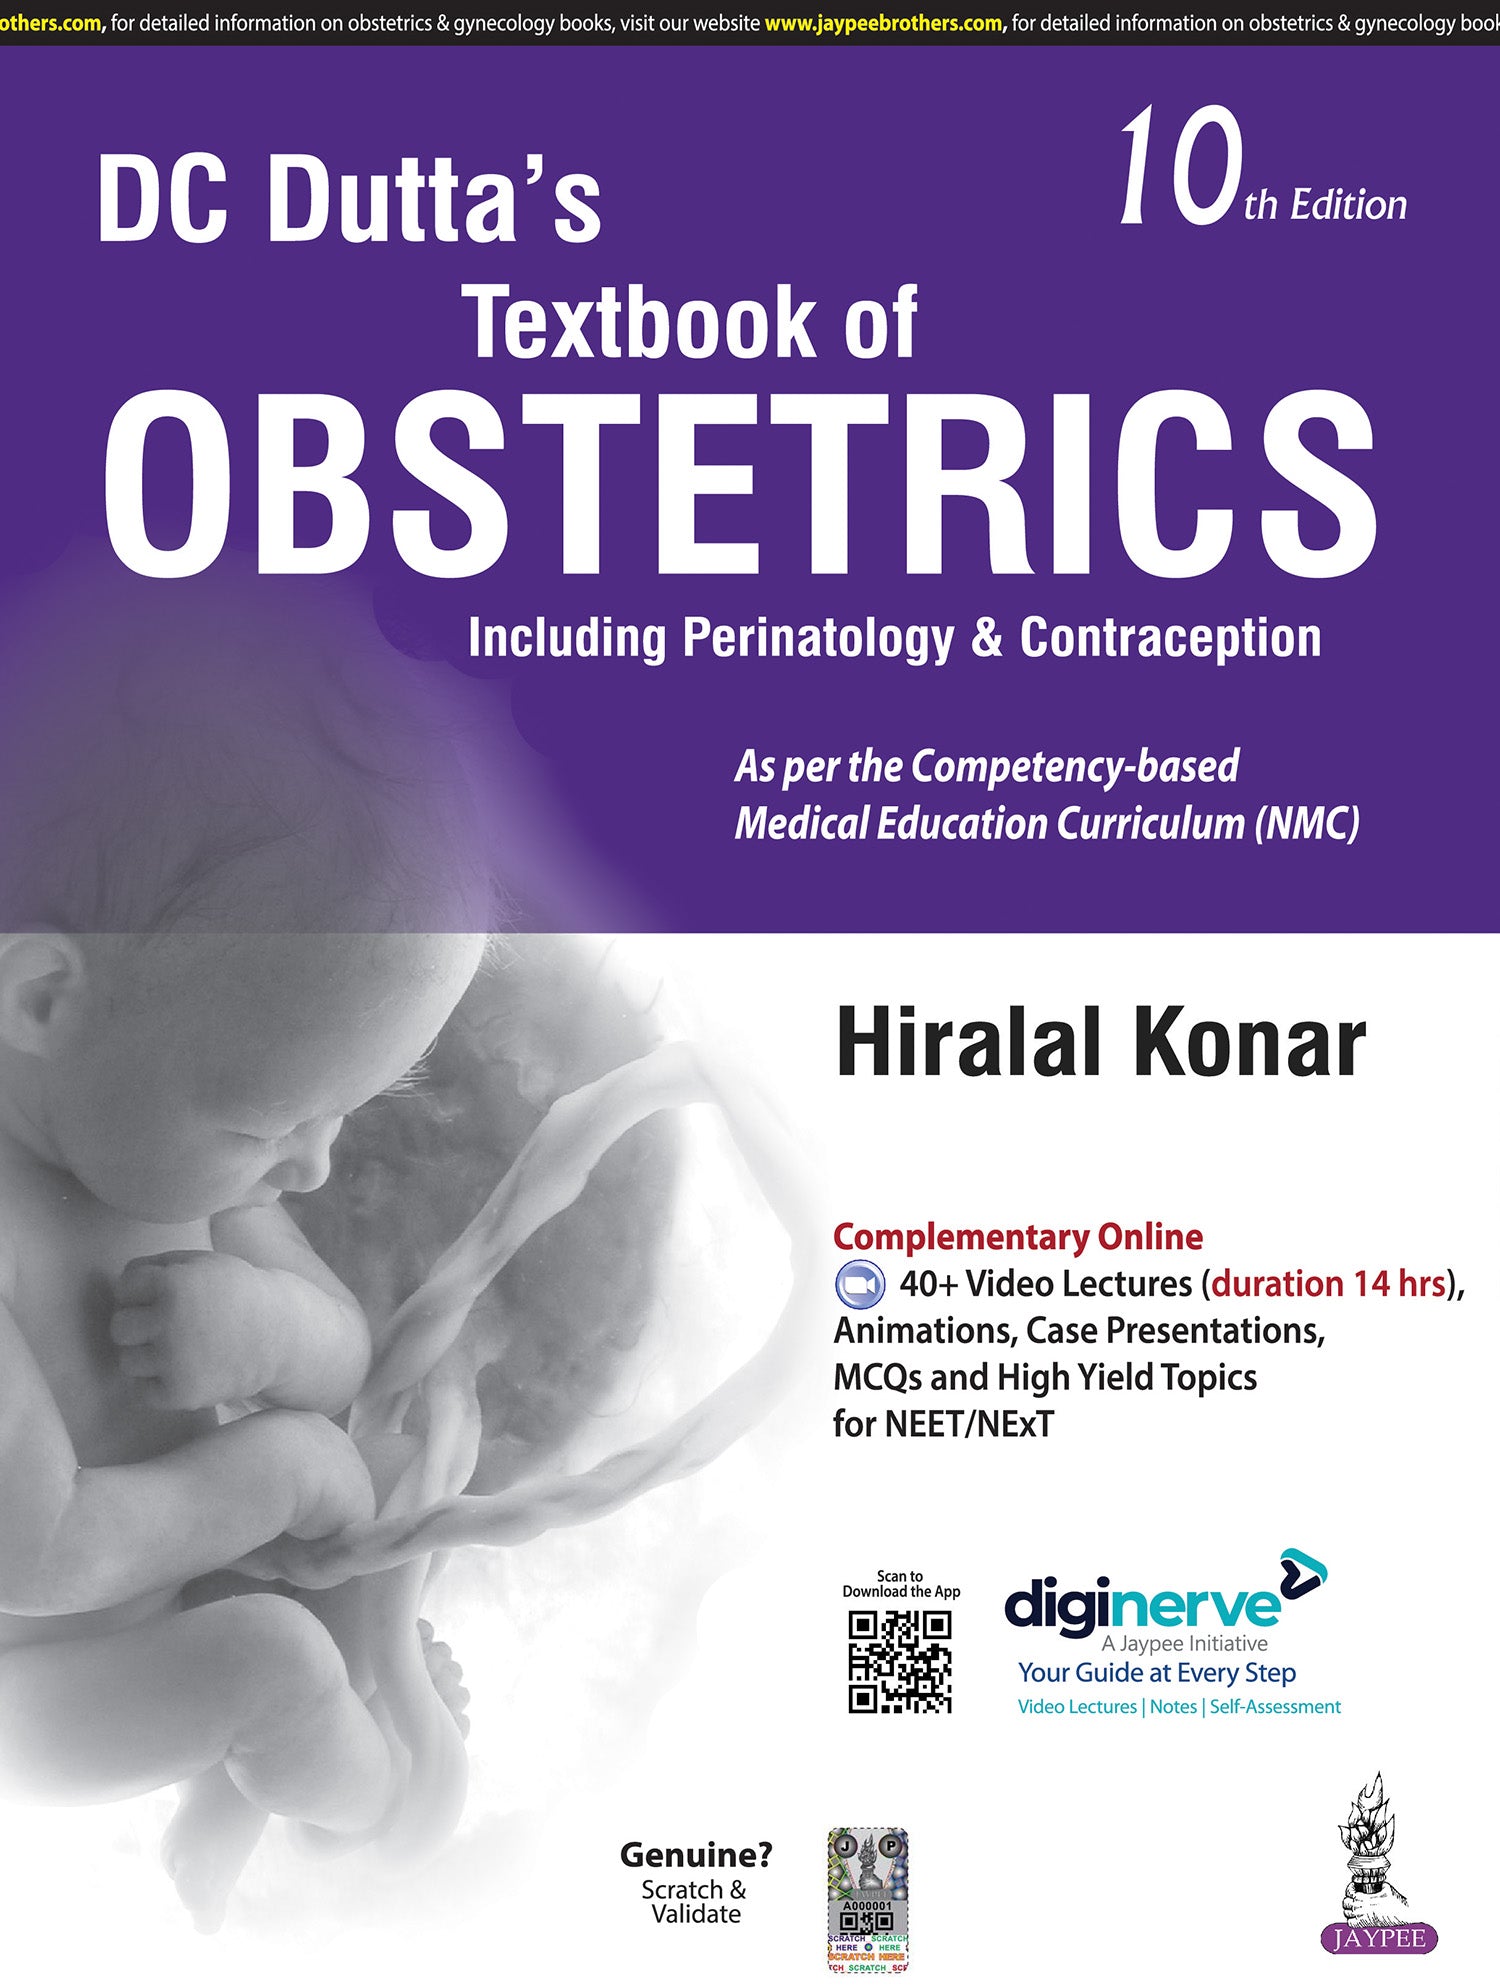 DC DUTTA'S TEXTBOOK OF OBSTETRICS INCLUDING PERINATOLOGY & CONTRACEPTION, 10/E,  by HIRALAL KONAR